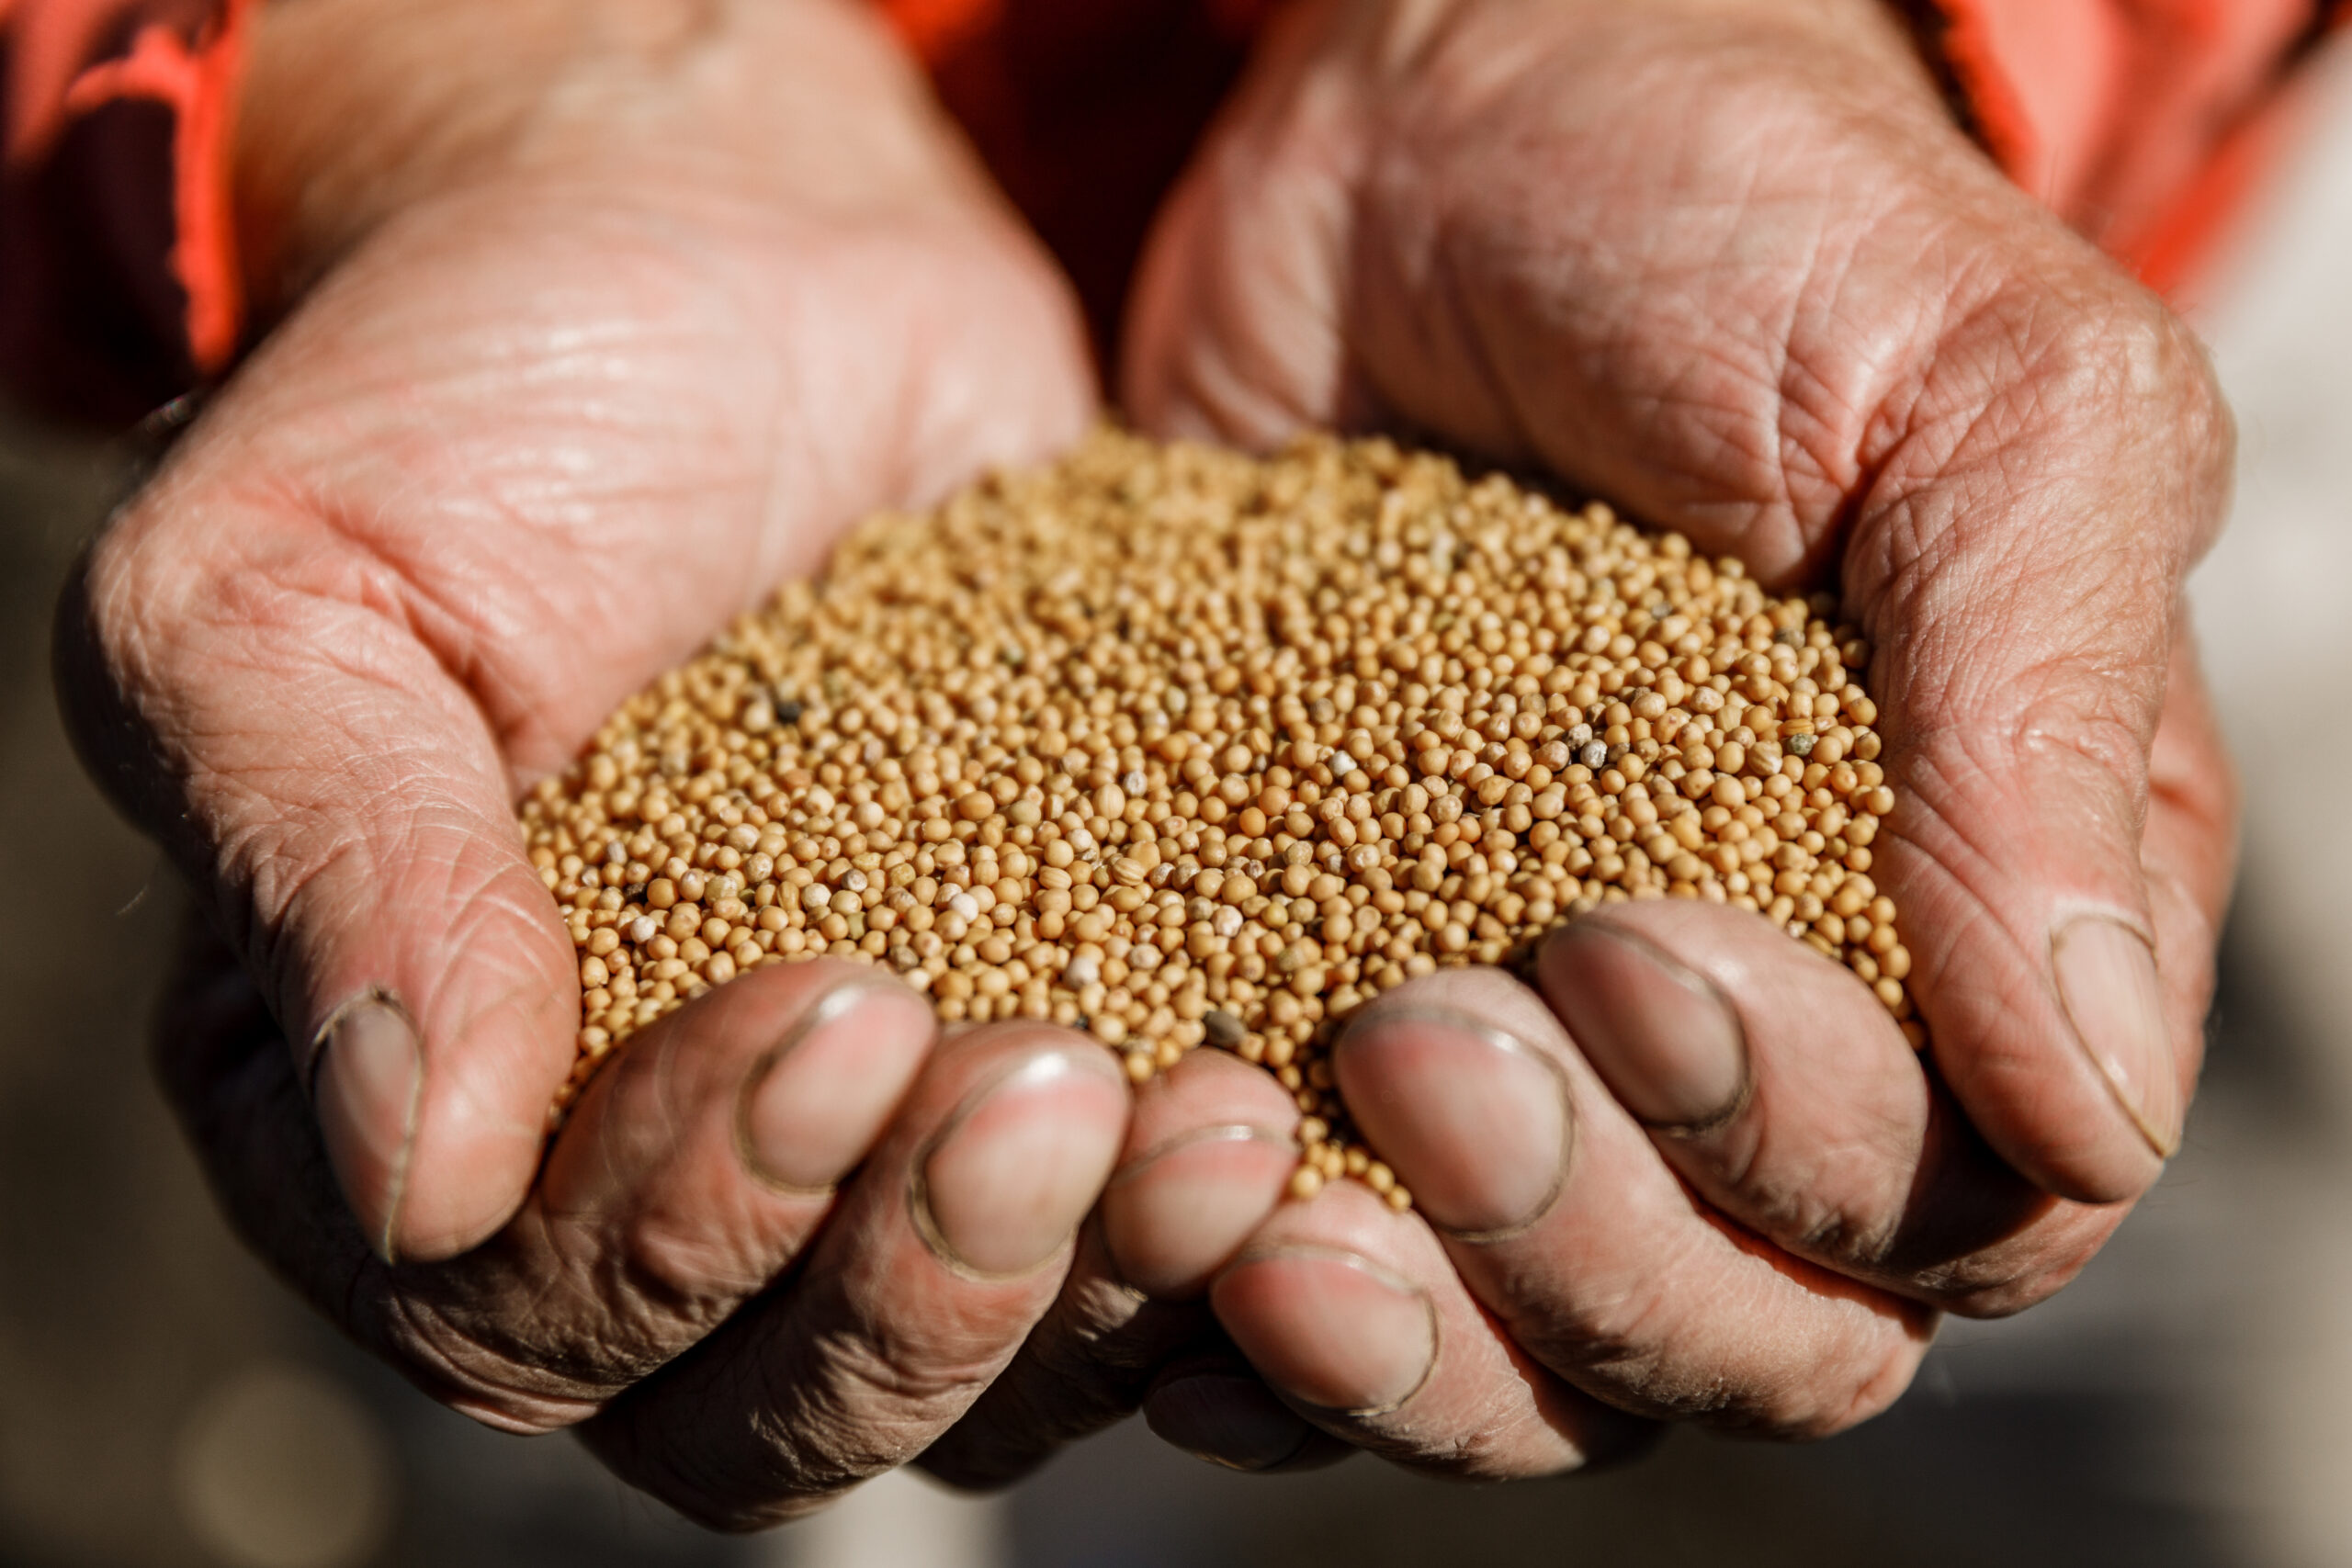 tiny mustard seeds in the farmer's hand